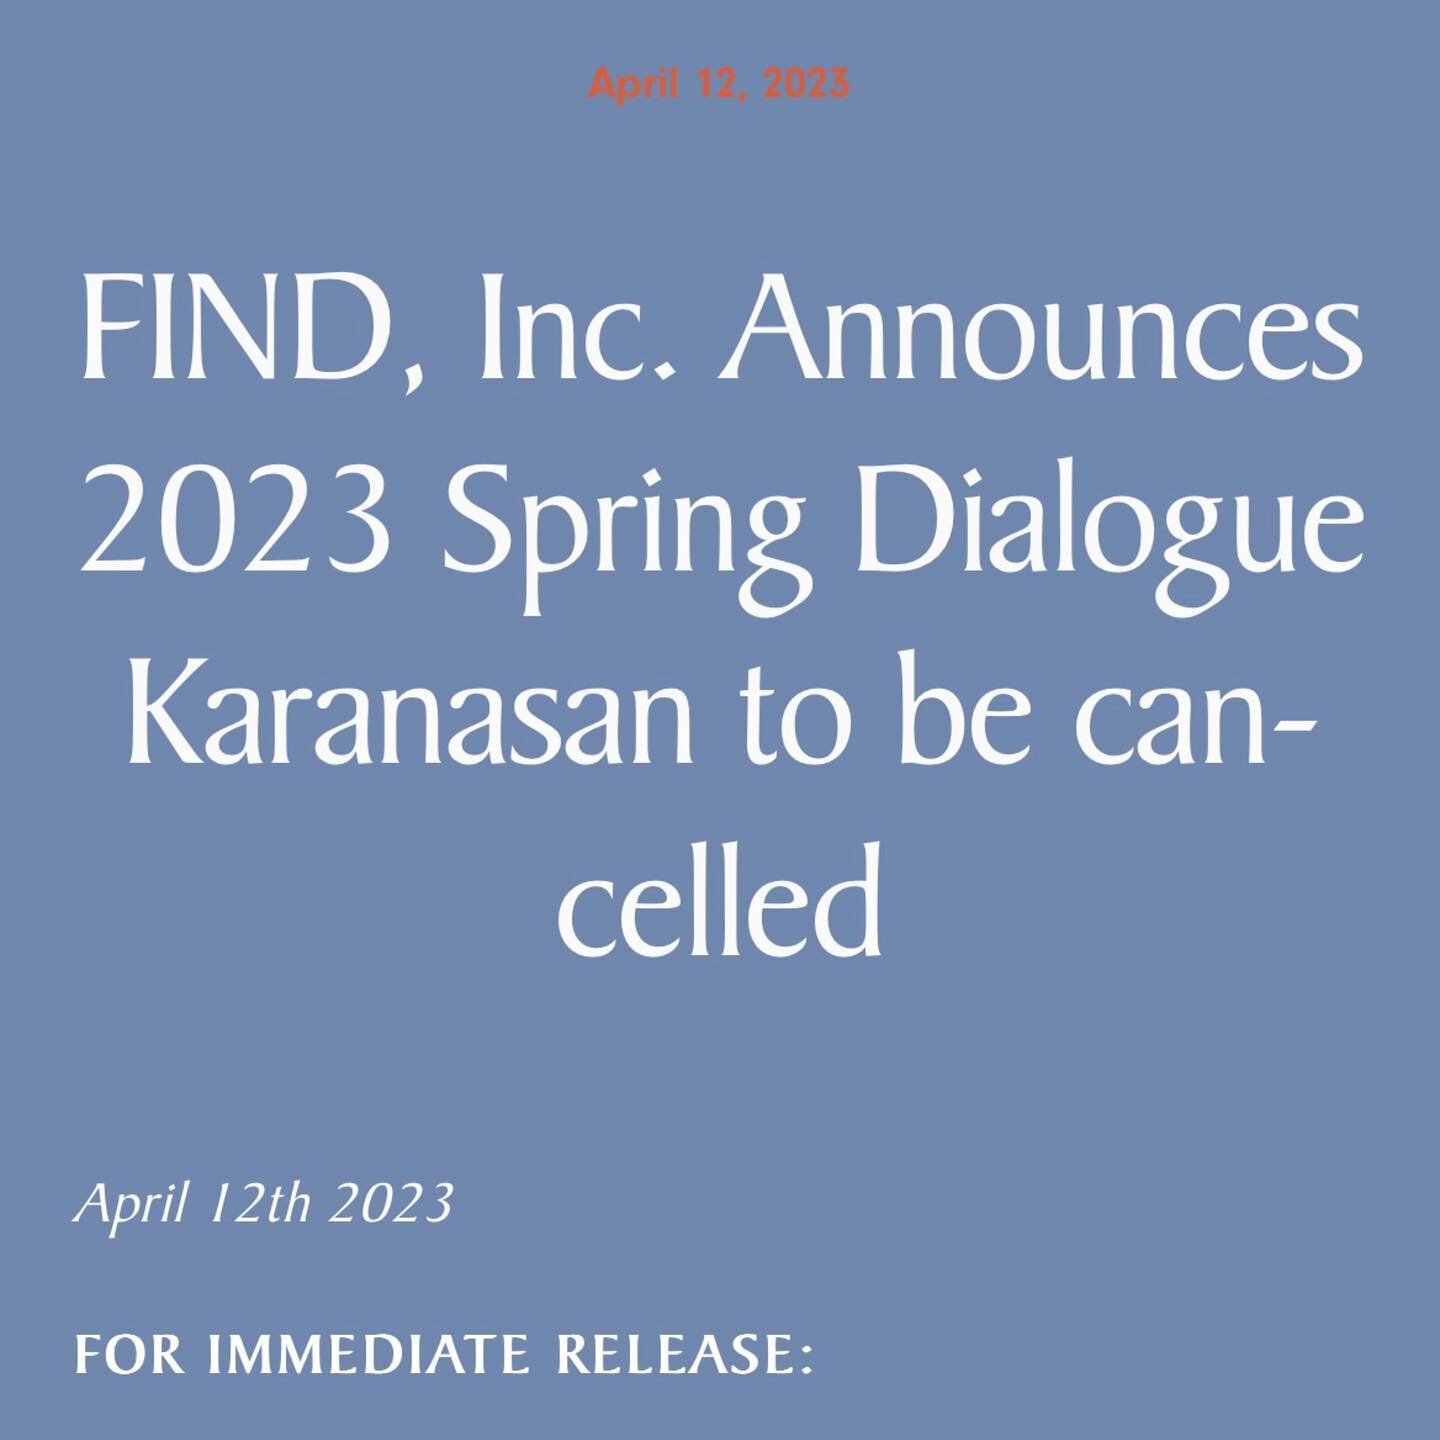 FIND, Inc. as of April 12th, 2023 announces the cancellation of 2023 Spring Dialogue Karanasan ☁️ Swipe to find out additional information regarding our latest press release!